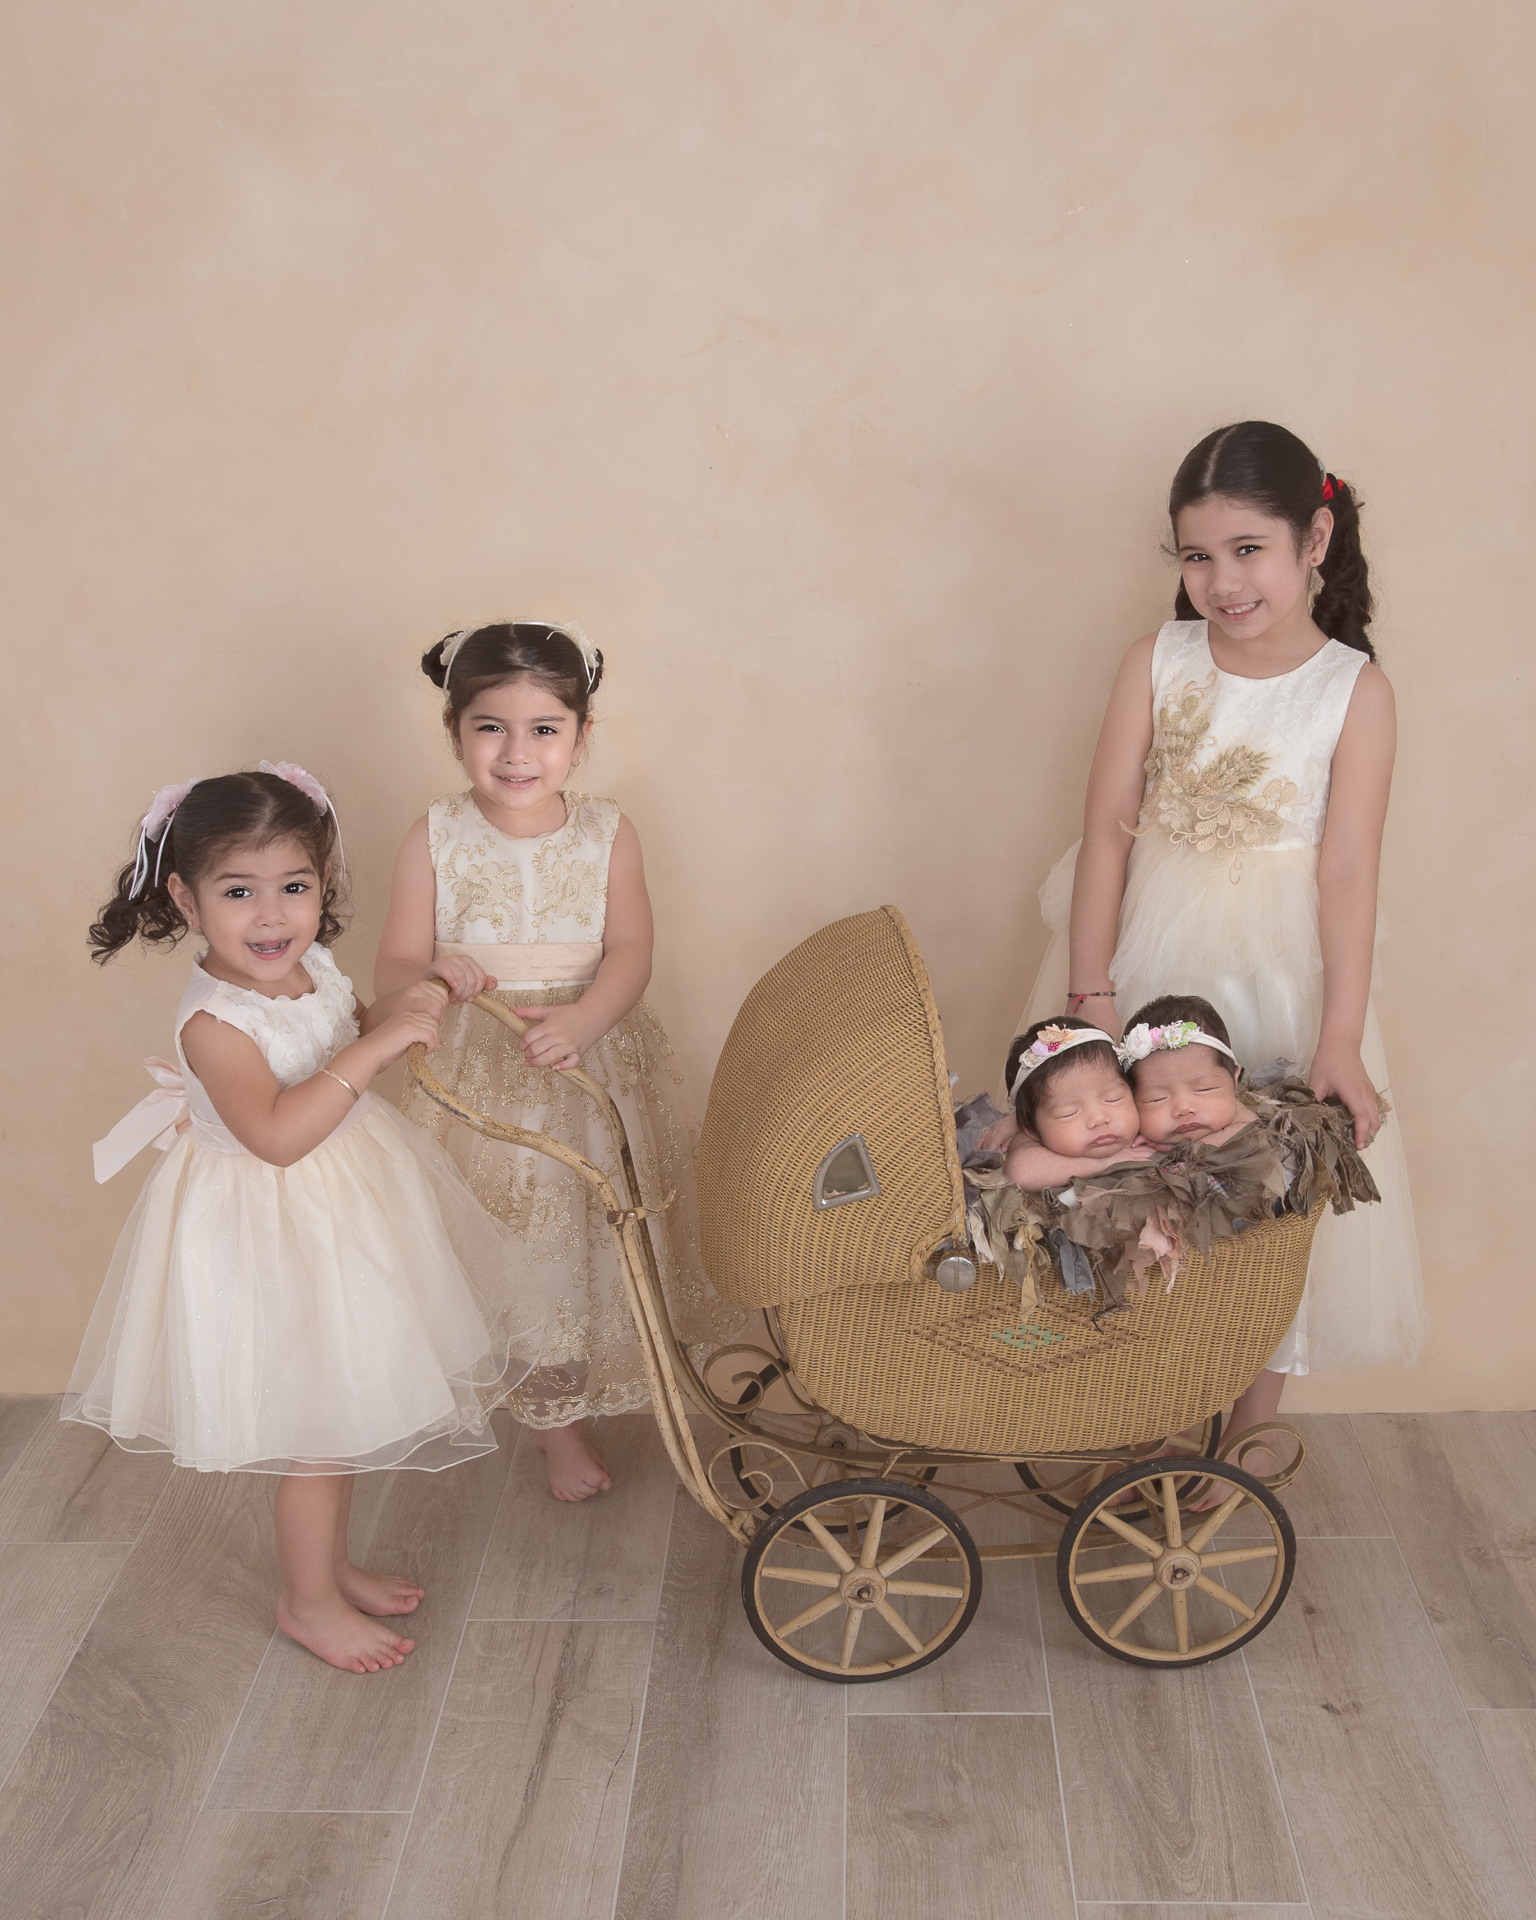 3 girls posing with their newborn twin sisters that are resting on a old fashioned decorative stroller. Light brown backdrop.